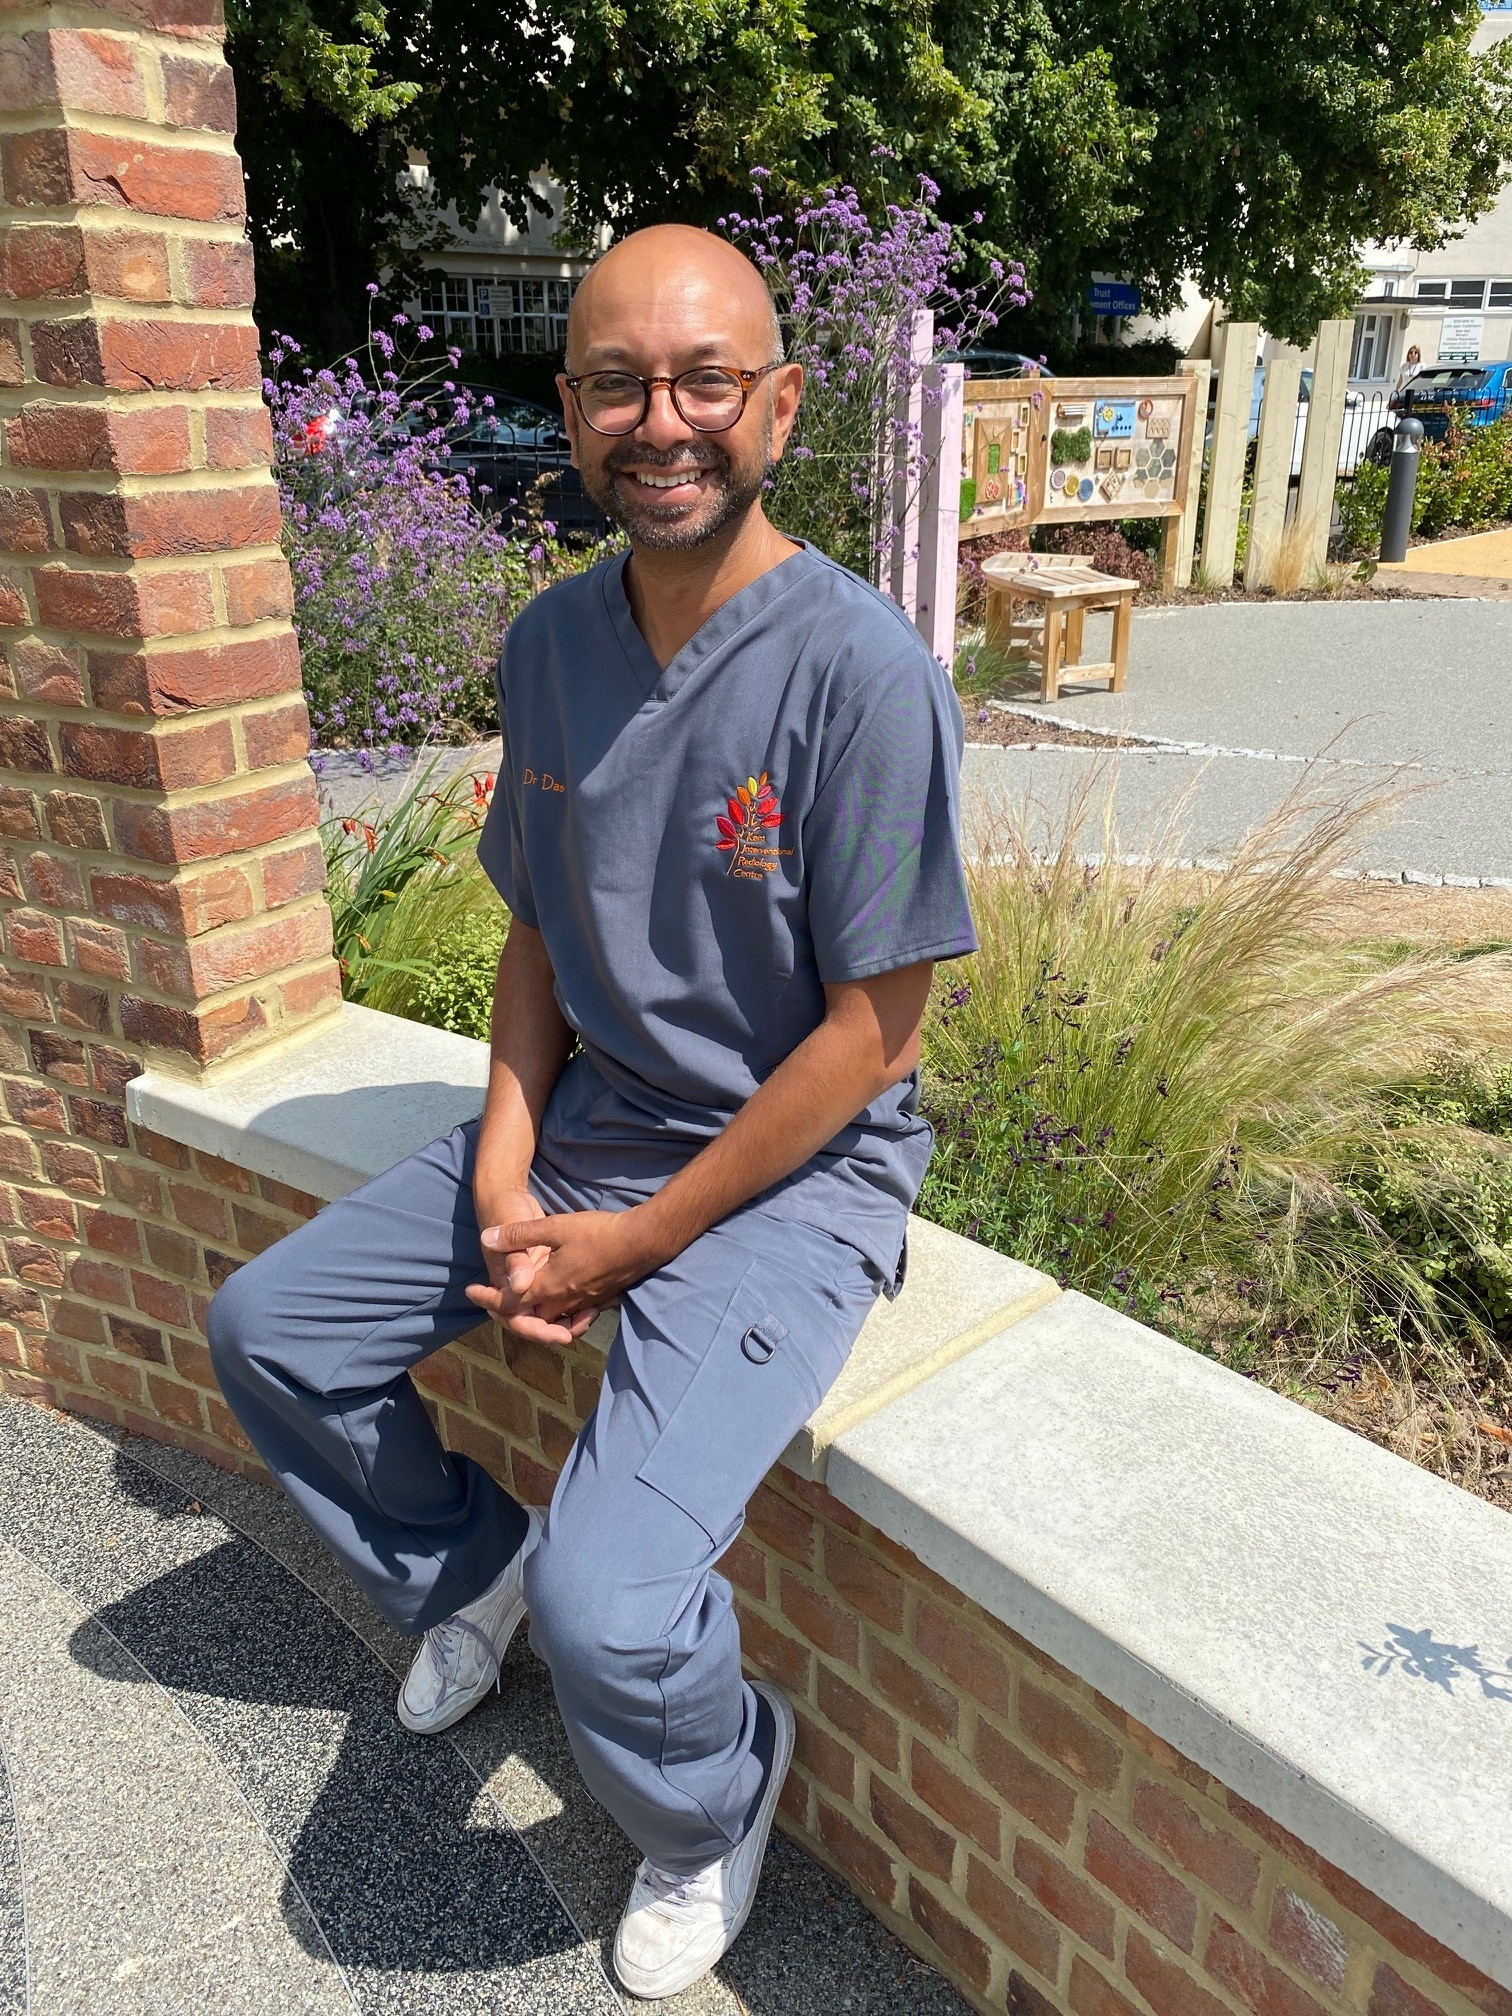 Dr Neelan Das, Trust AI lead and consultant radiologist. He is pictured sitting on a low wall in a garden wearing scrubs